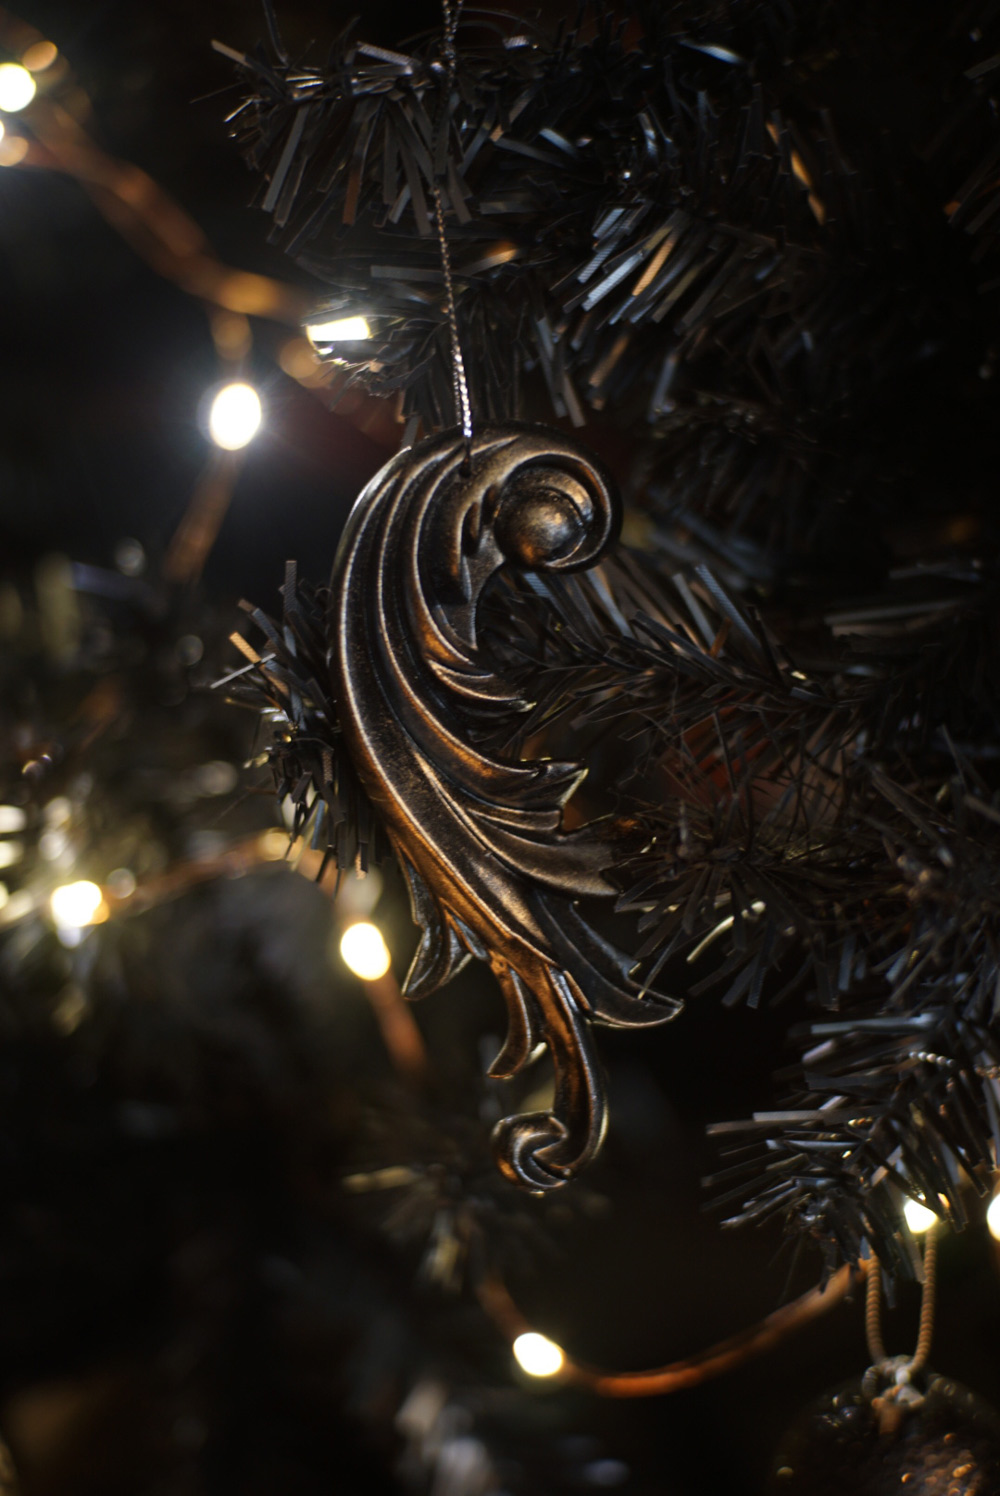 Close-up of a dark ornament hanging on a black Christmas tree with lights.